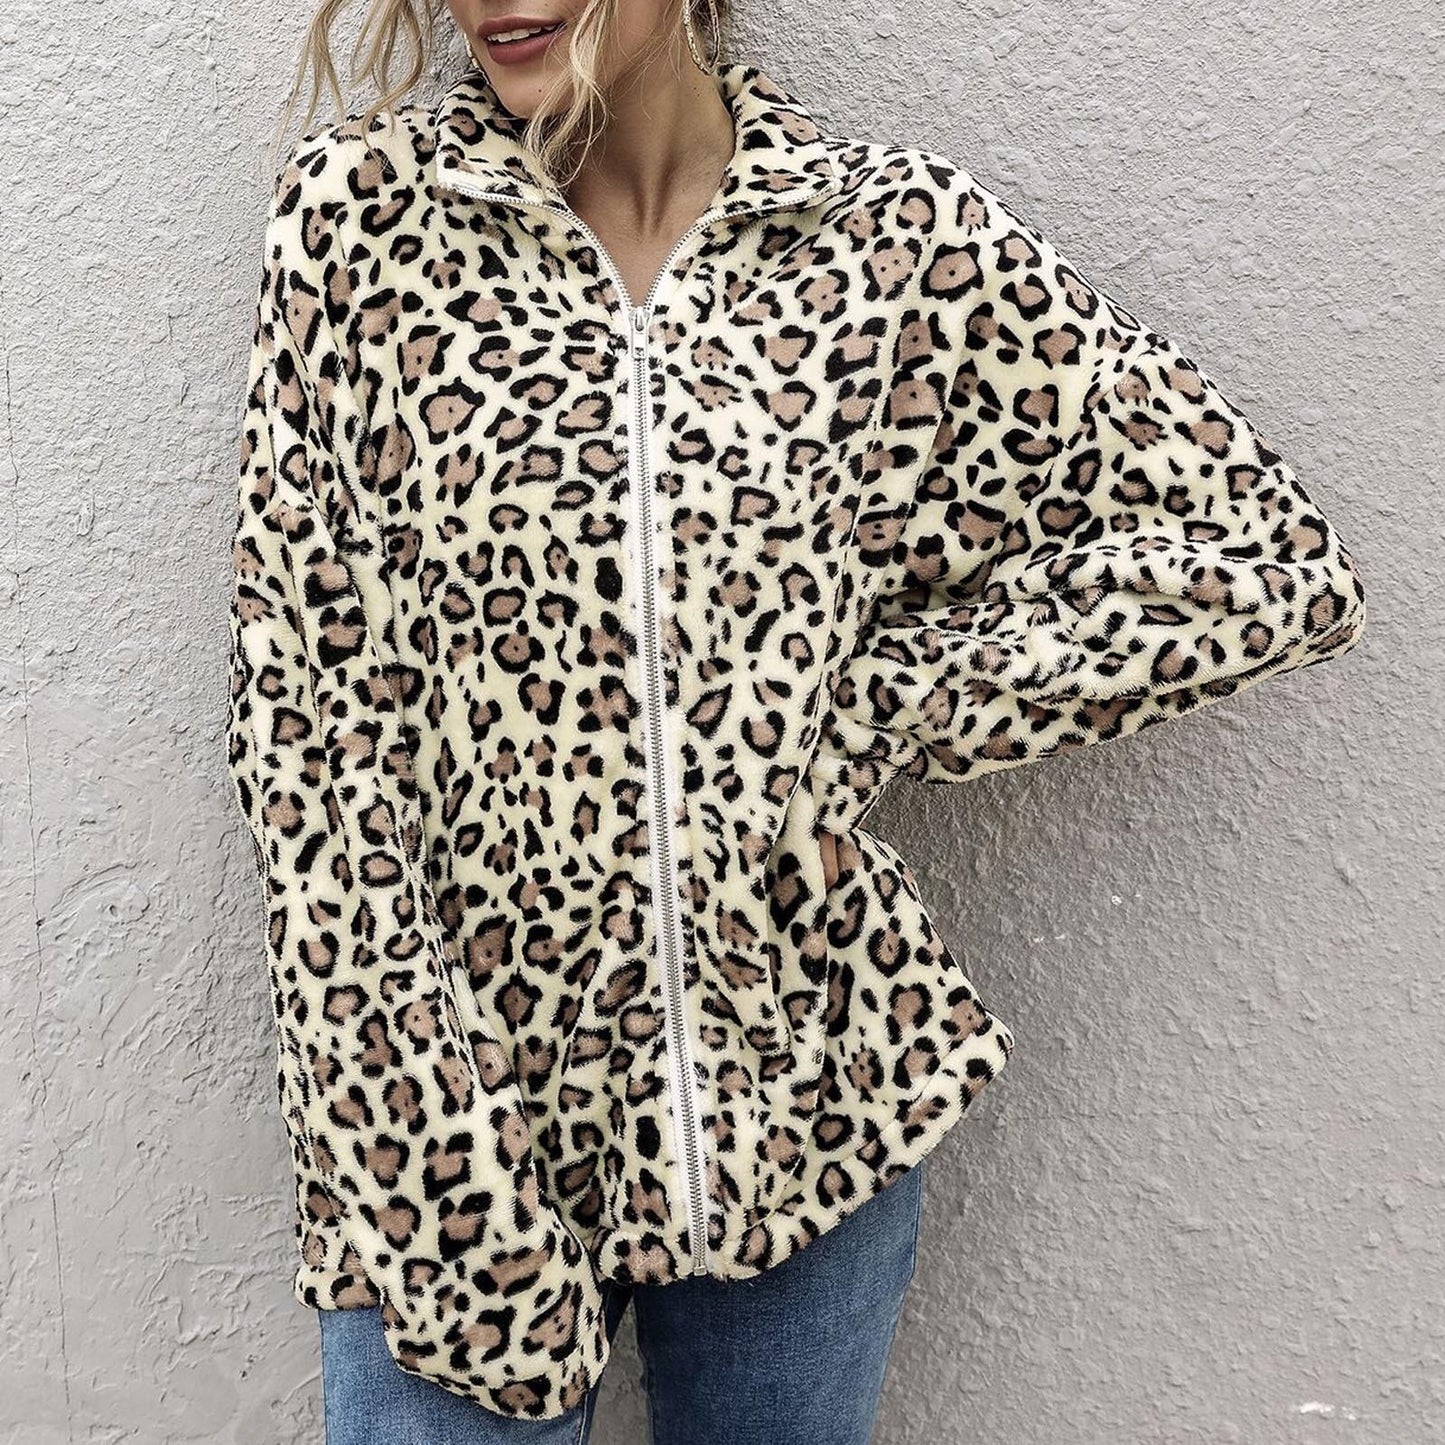 Fashion Women Ladies Autumn And Winter Thicken Warm Zipper Leopard Printed Lapel Long Sleeve Loose Plush Jacket Outerwear#g3